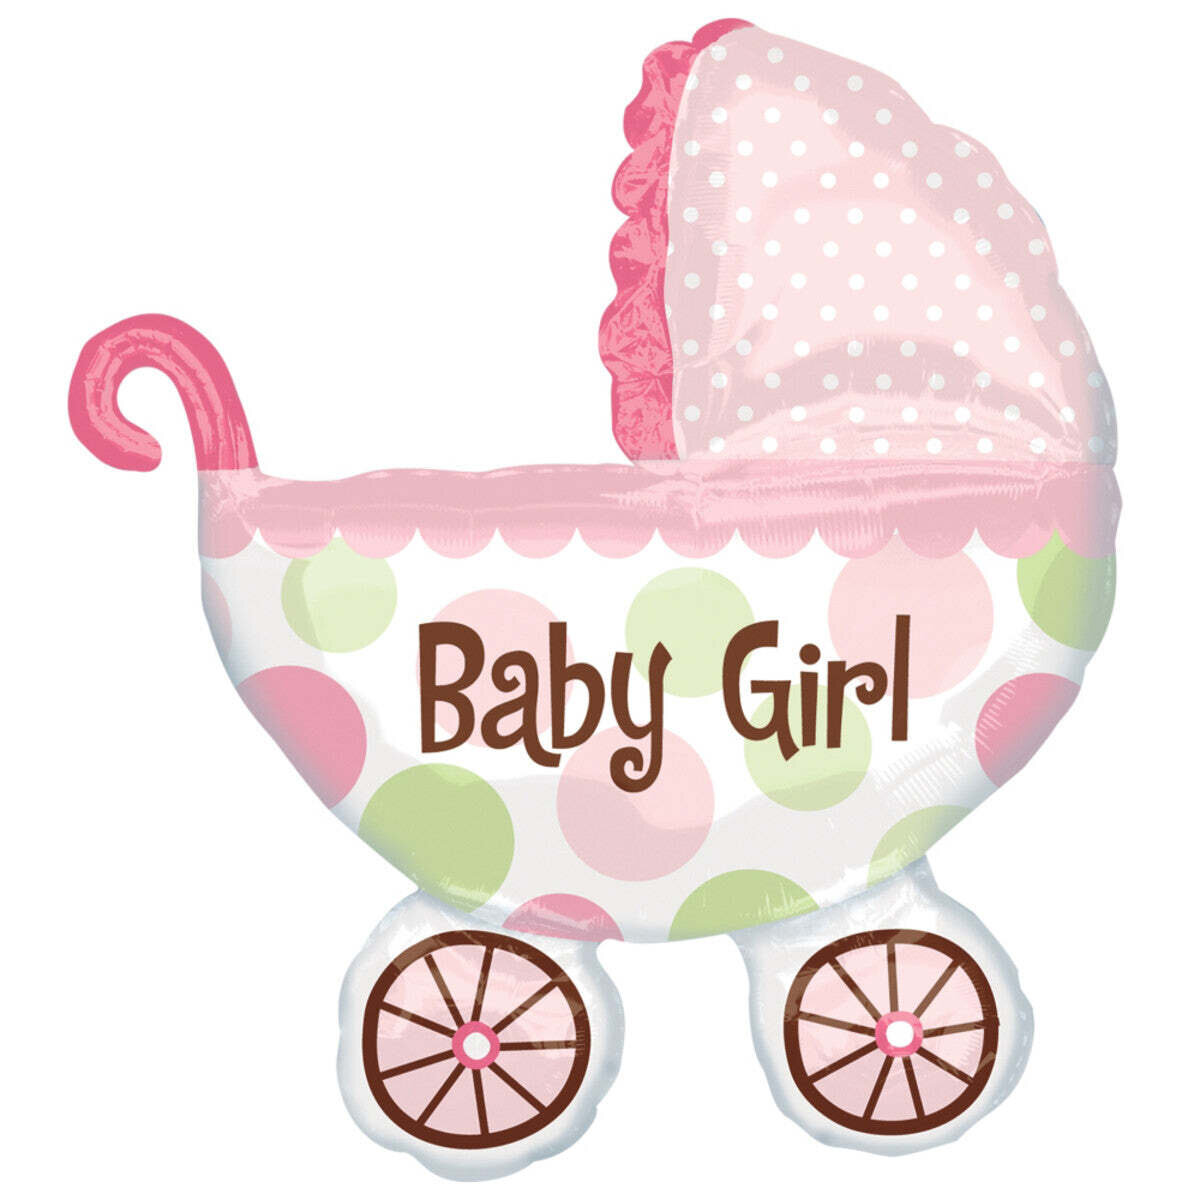 Baby Buggy Girl Foil Balloon 28 X 31in